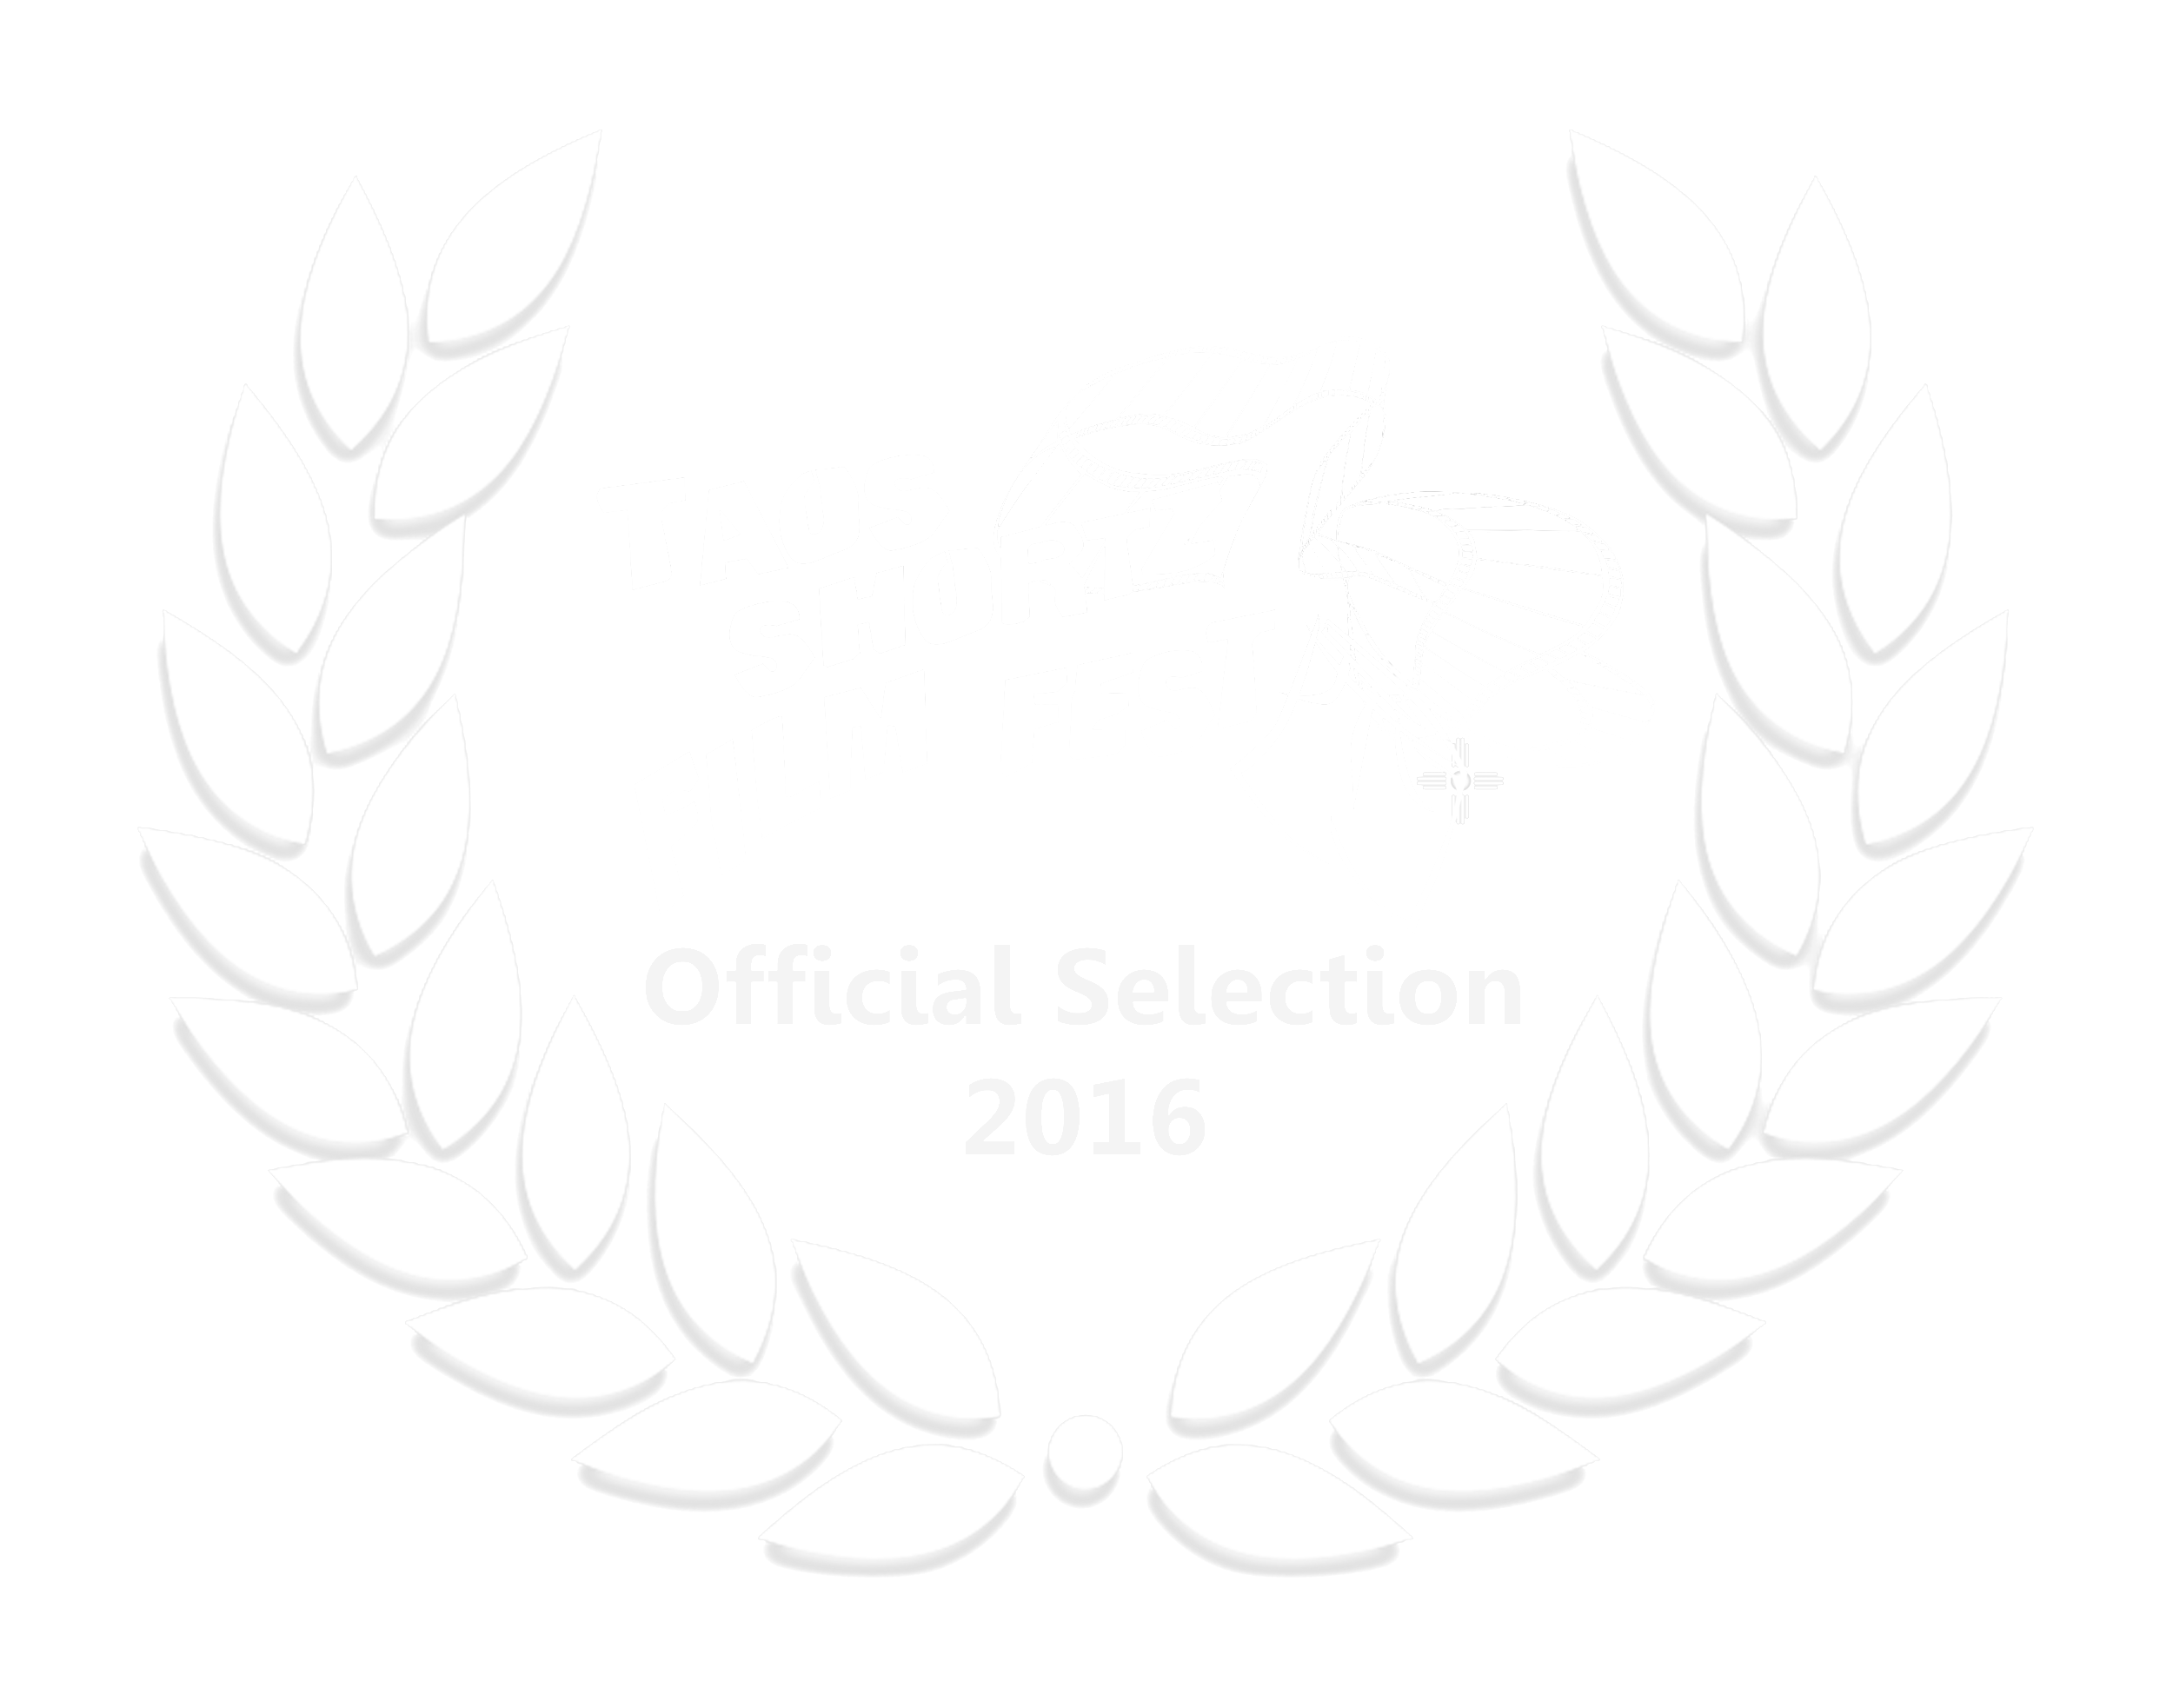 Taos Shorts Film Fest 2016 | Official Selection